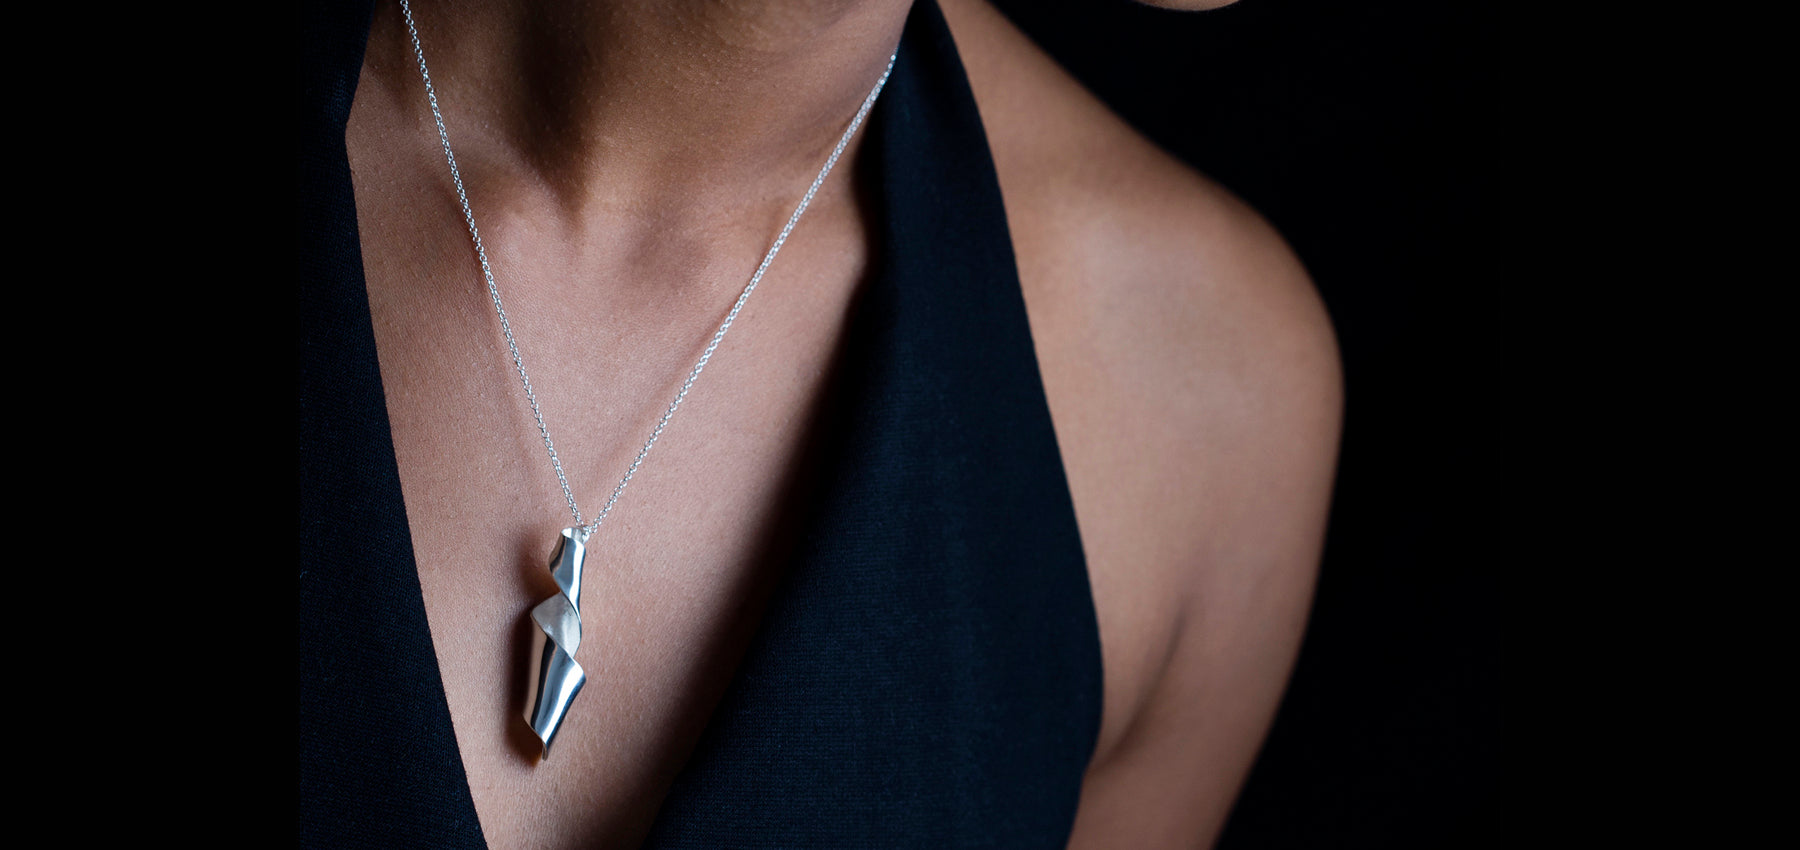 Woman wearing necklace with large silver pendant